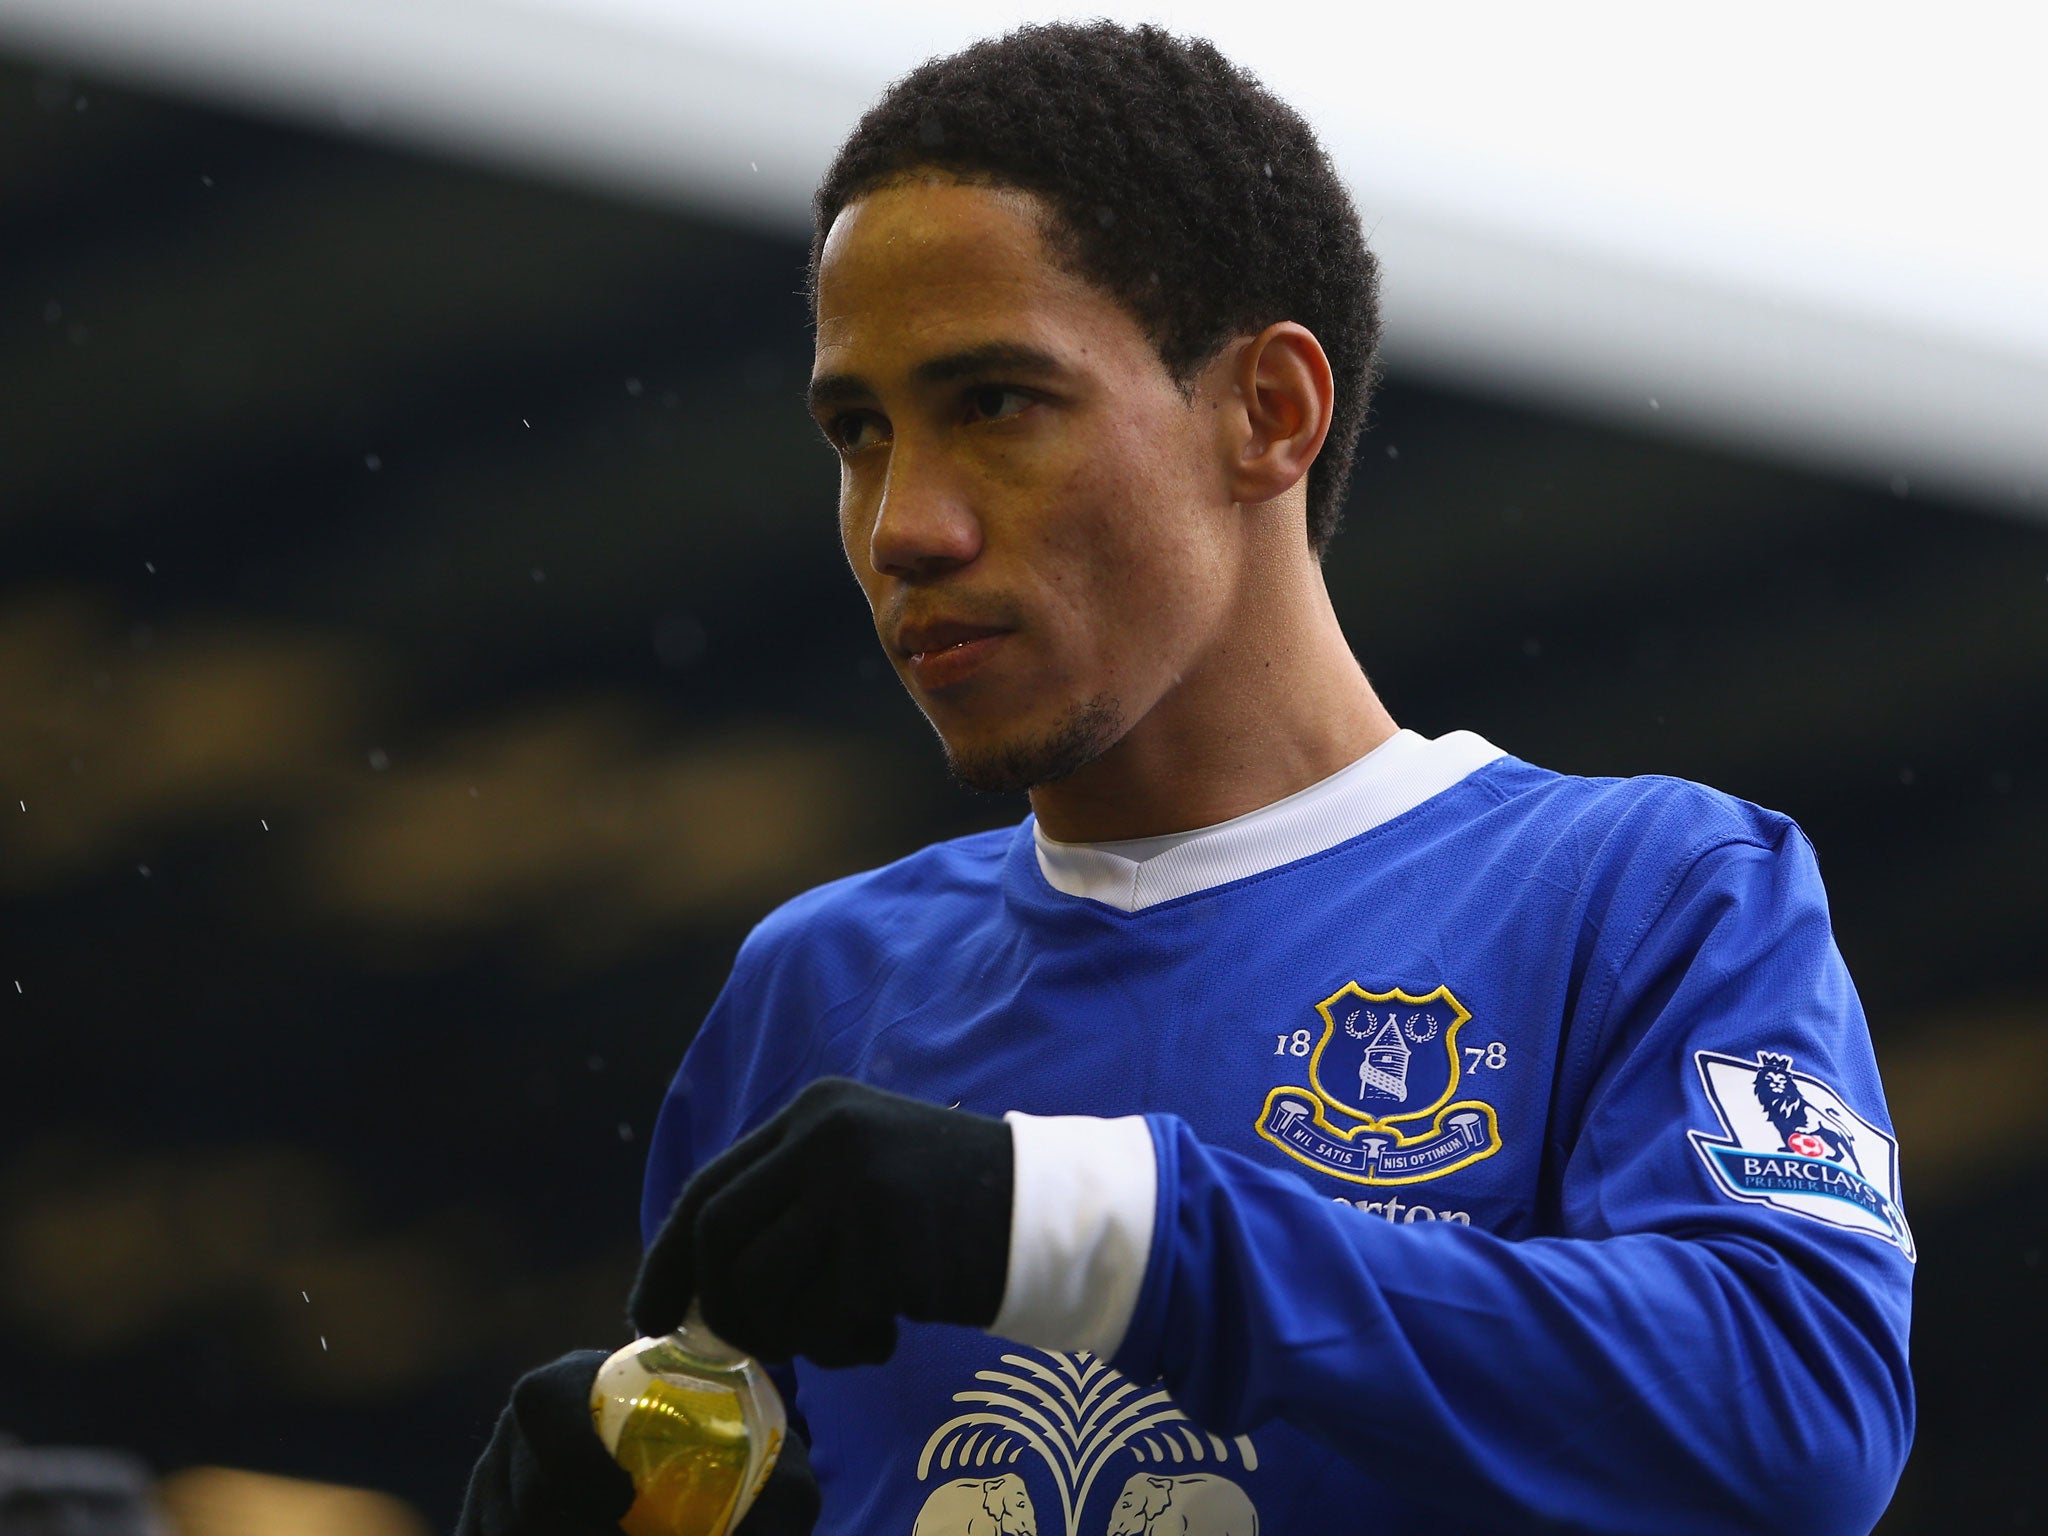 Everton are still without Steven Pienaar as they face his old club, Tottenham Hotspur